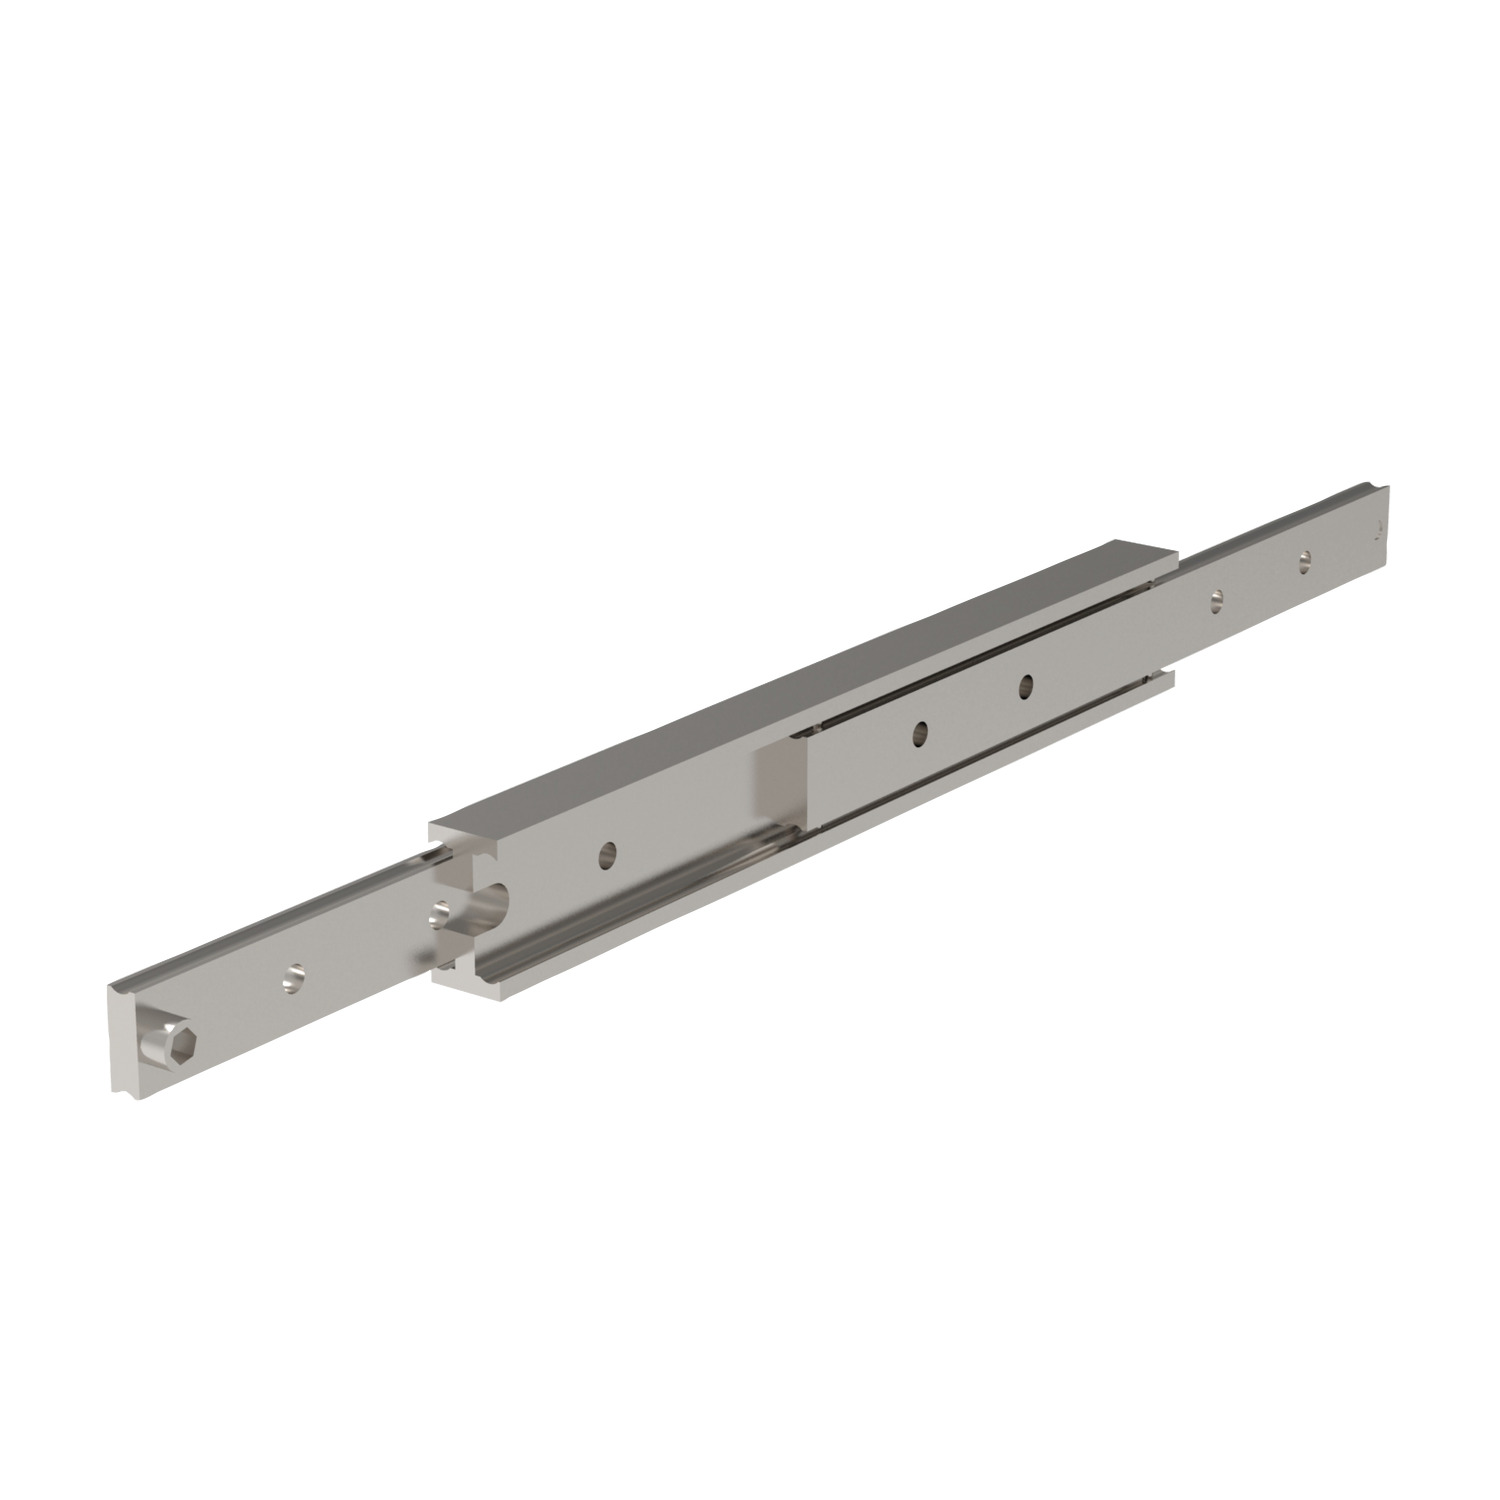 L2051.0650 Stainless AISI 316 slide l 650 size 40 Stainless steel (A4,AISI 316) -rail , balls & cage